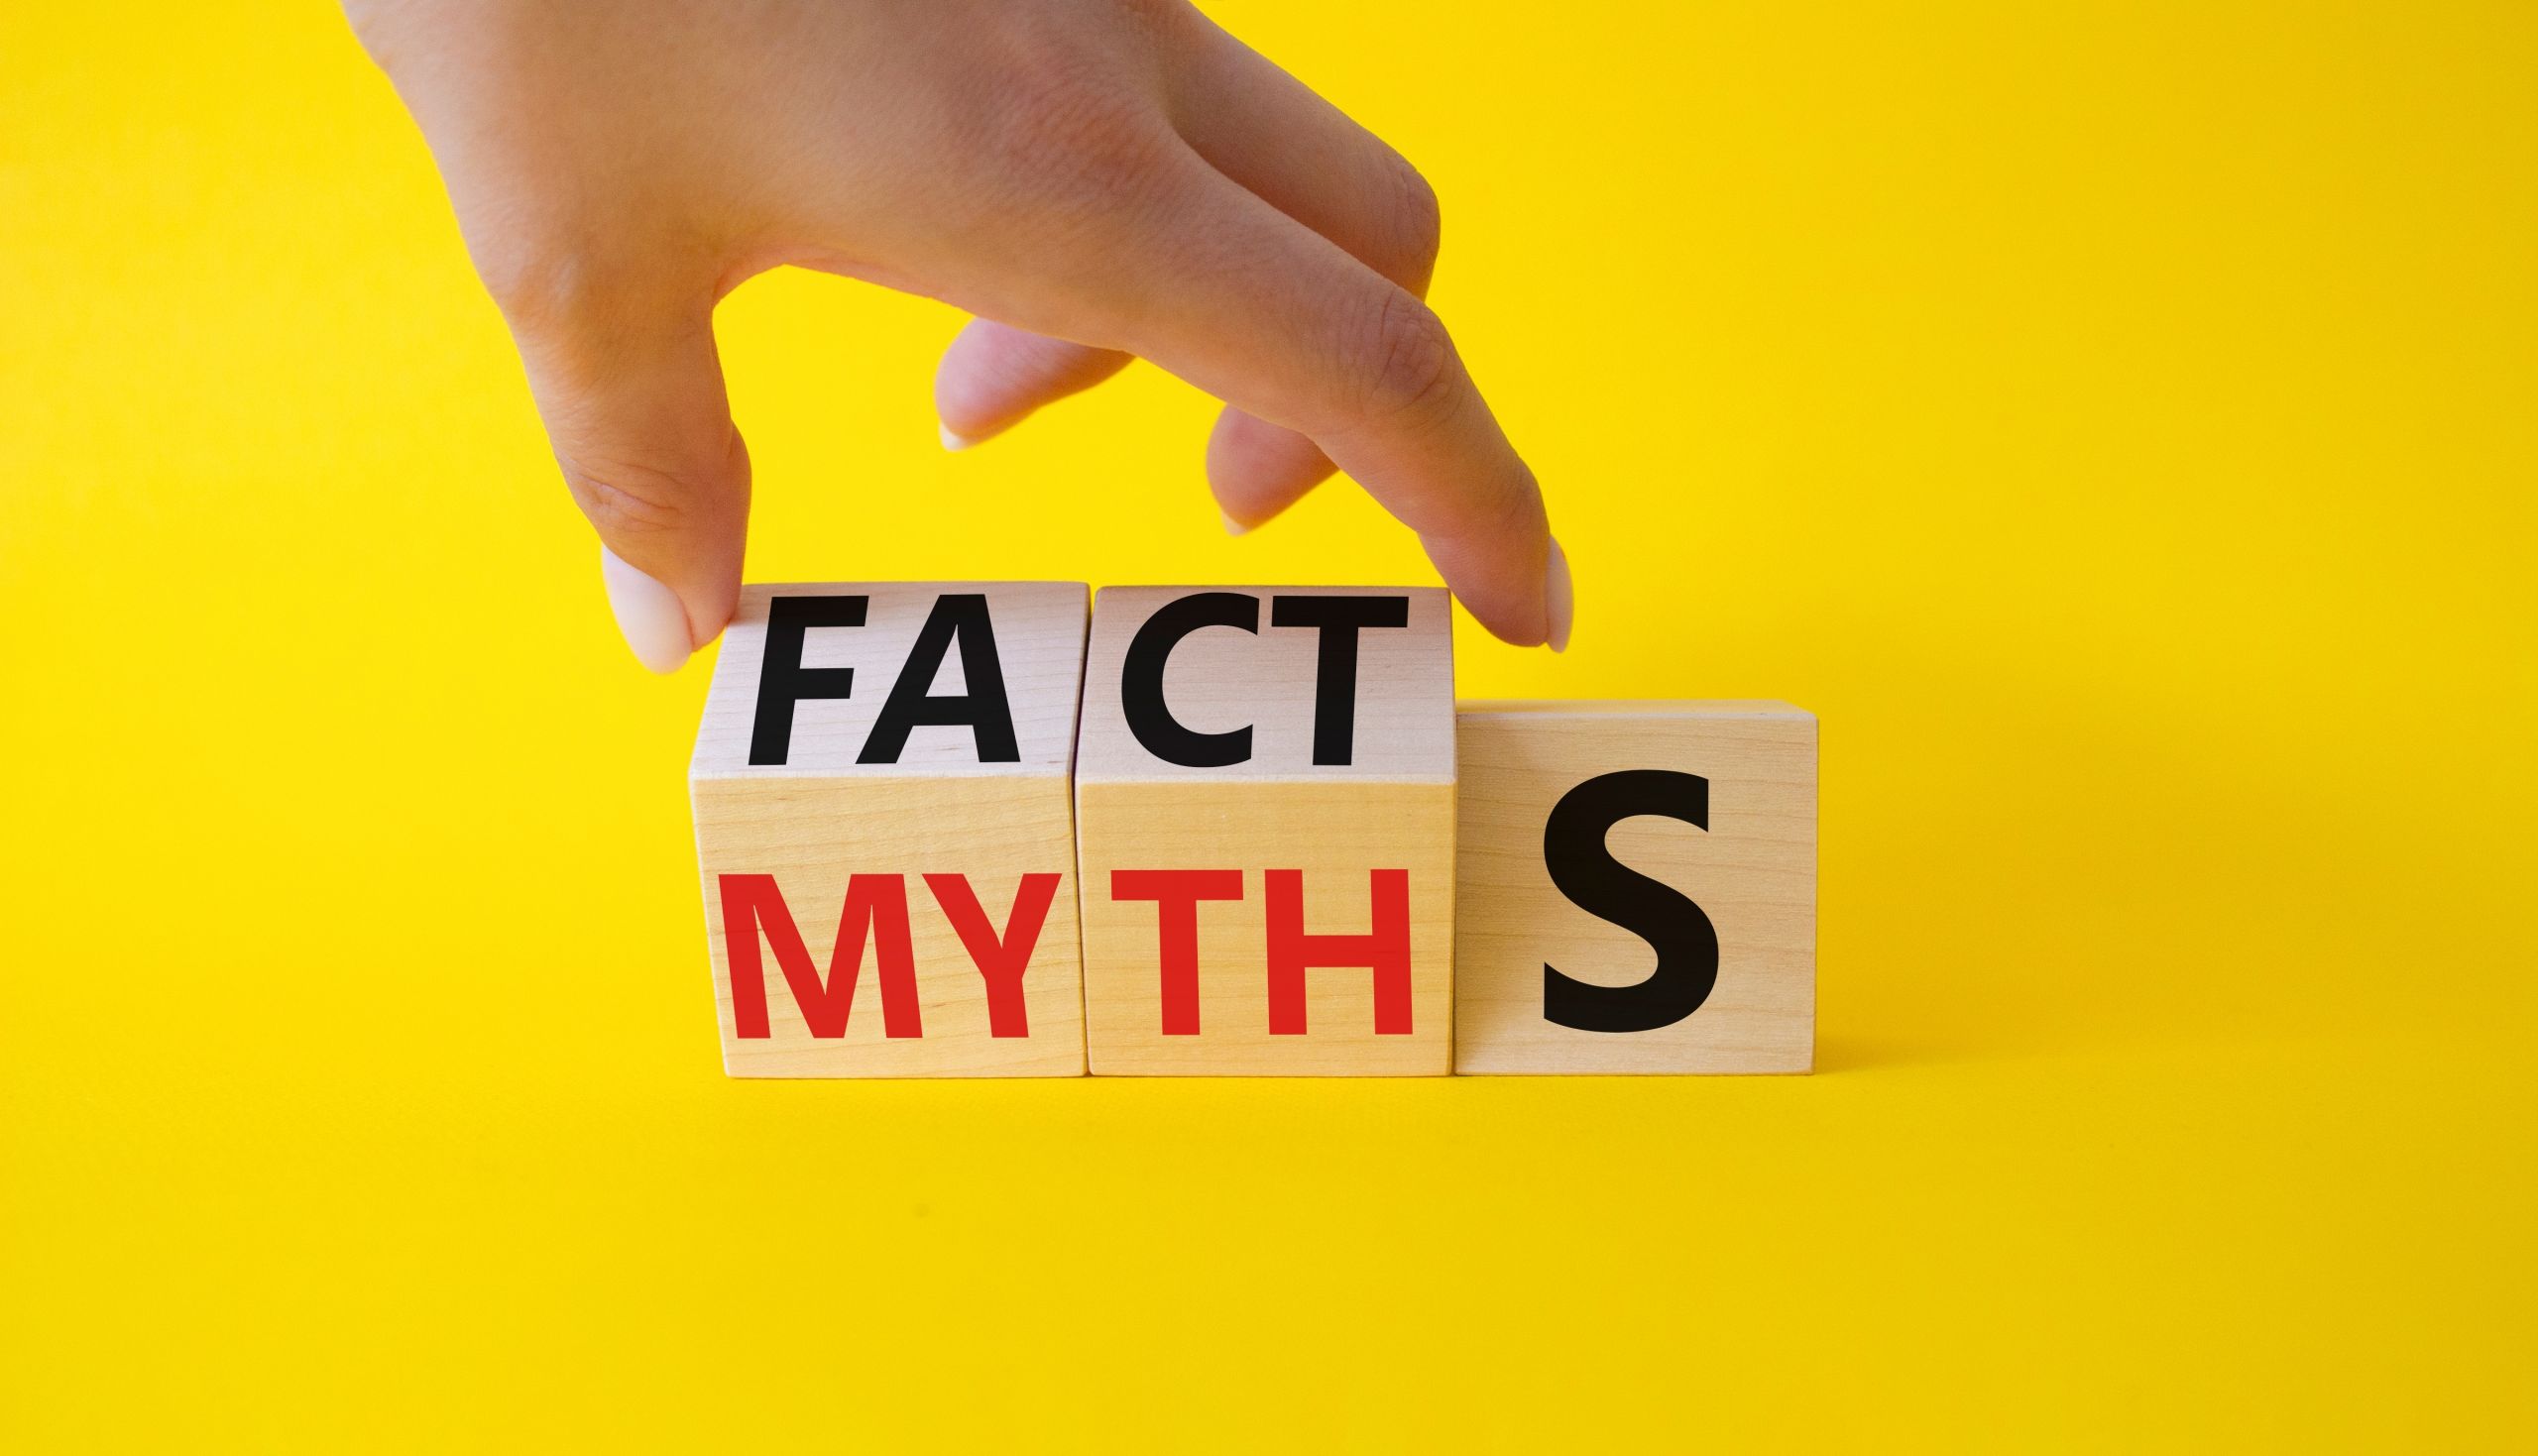 Coworking Myths and The Facts - The CoLab @ 55 Merritt